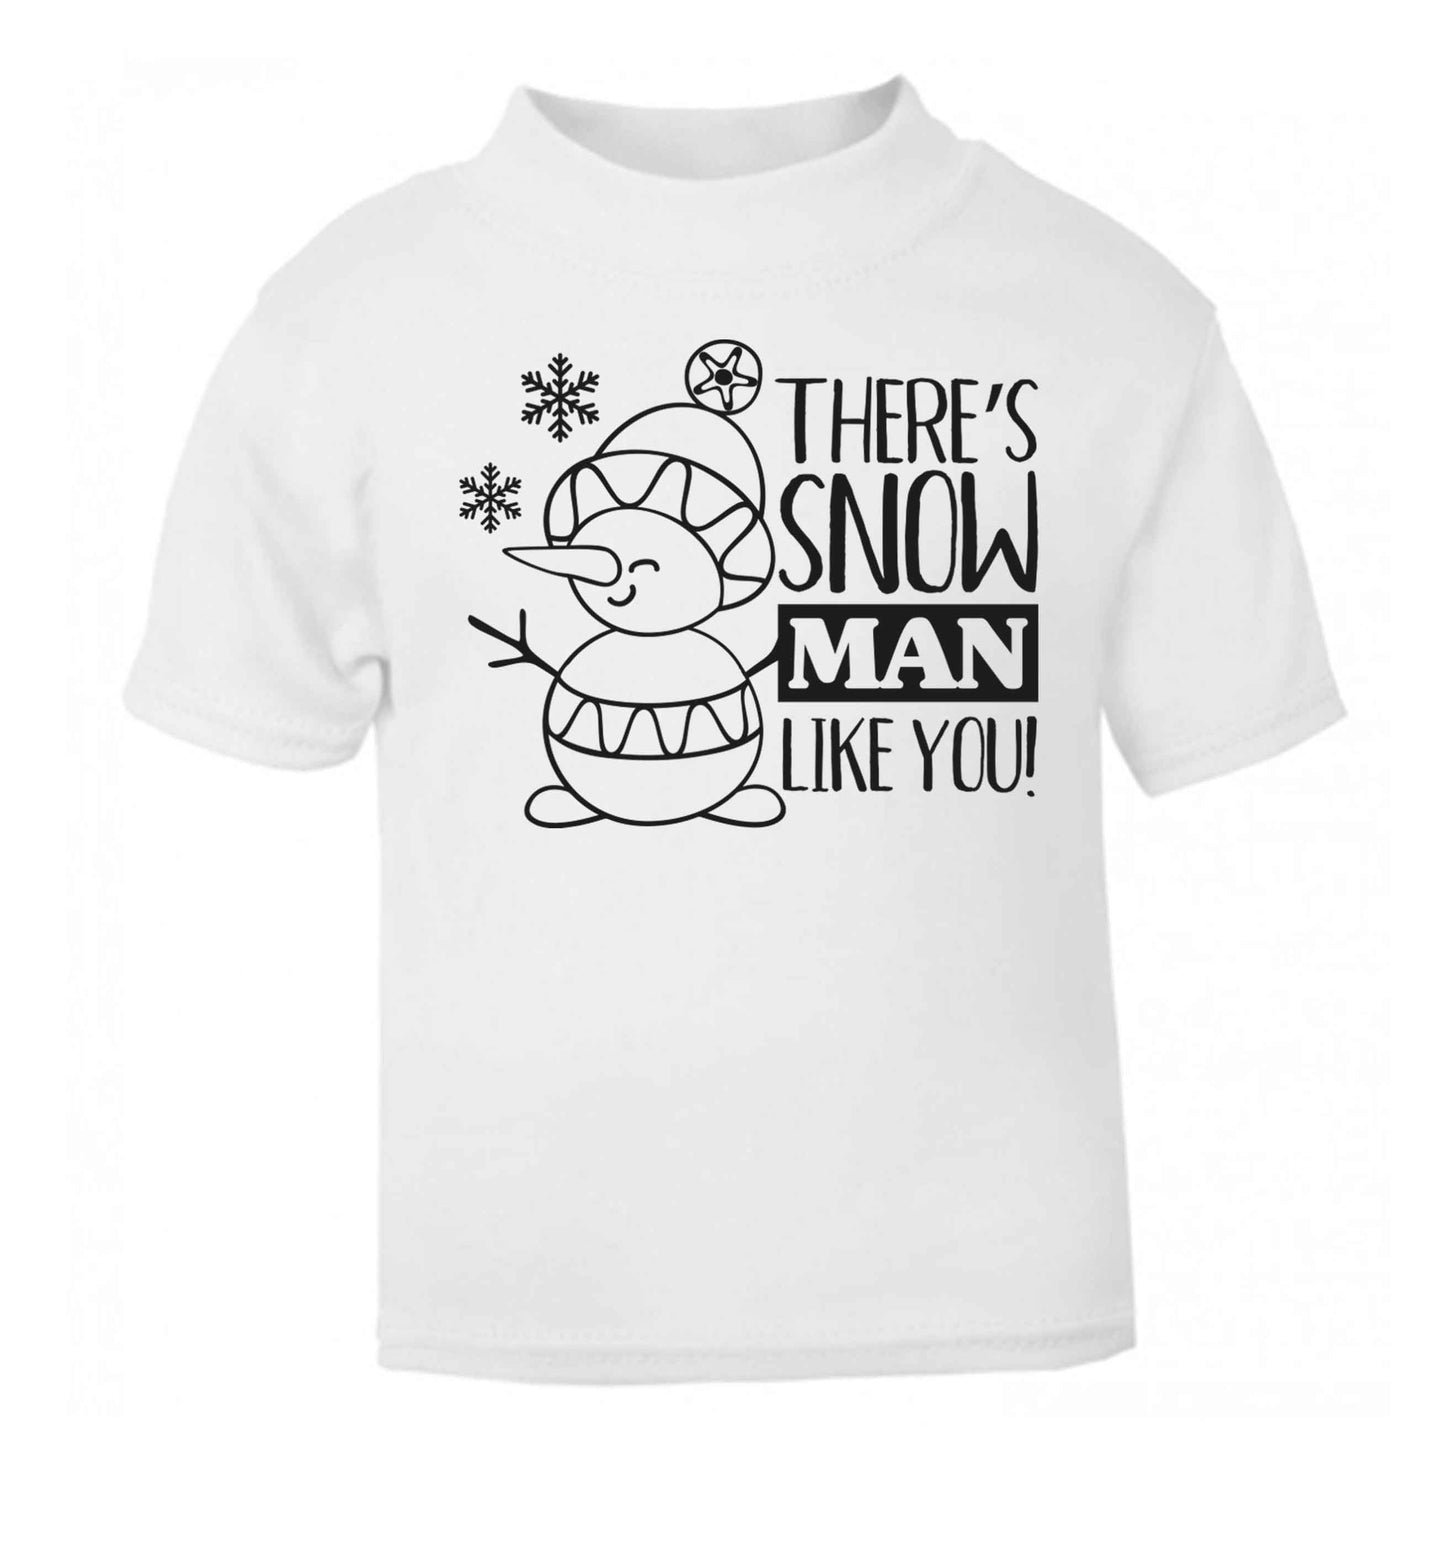 There's snow man like you white baby toddler Tshirt 2 Years